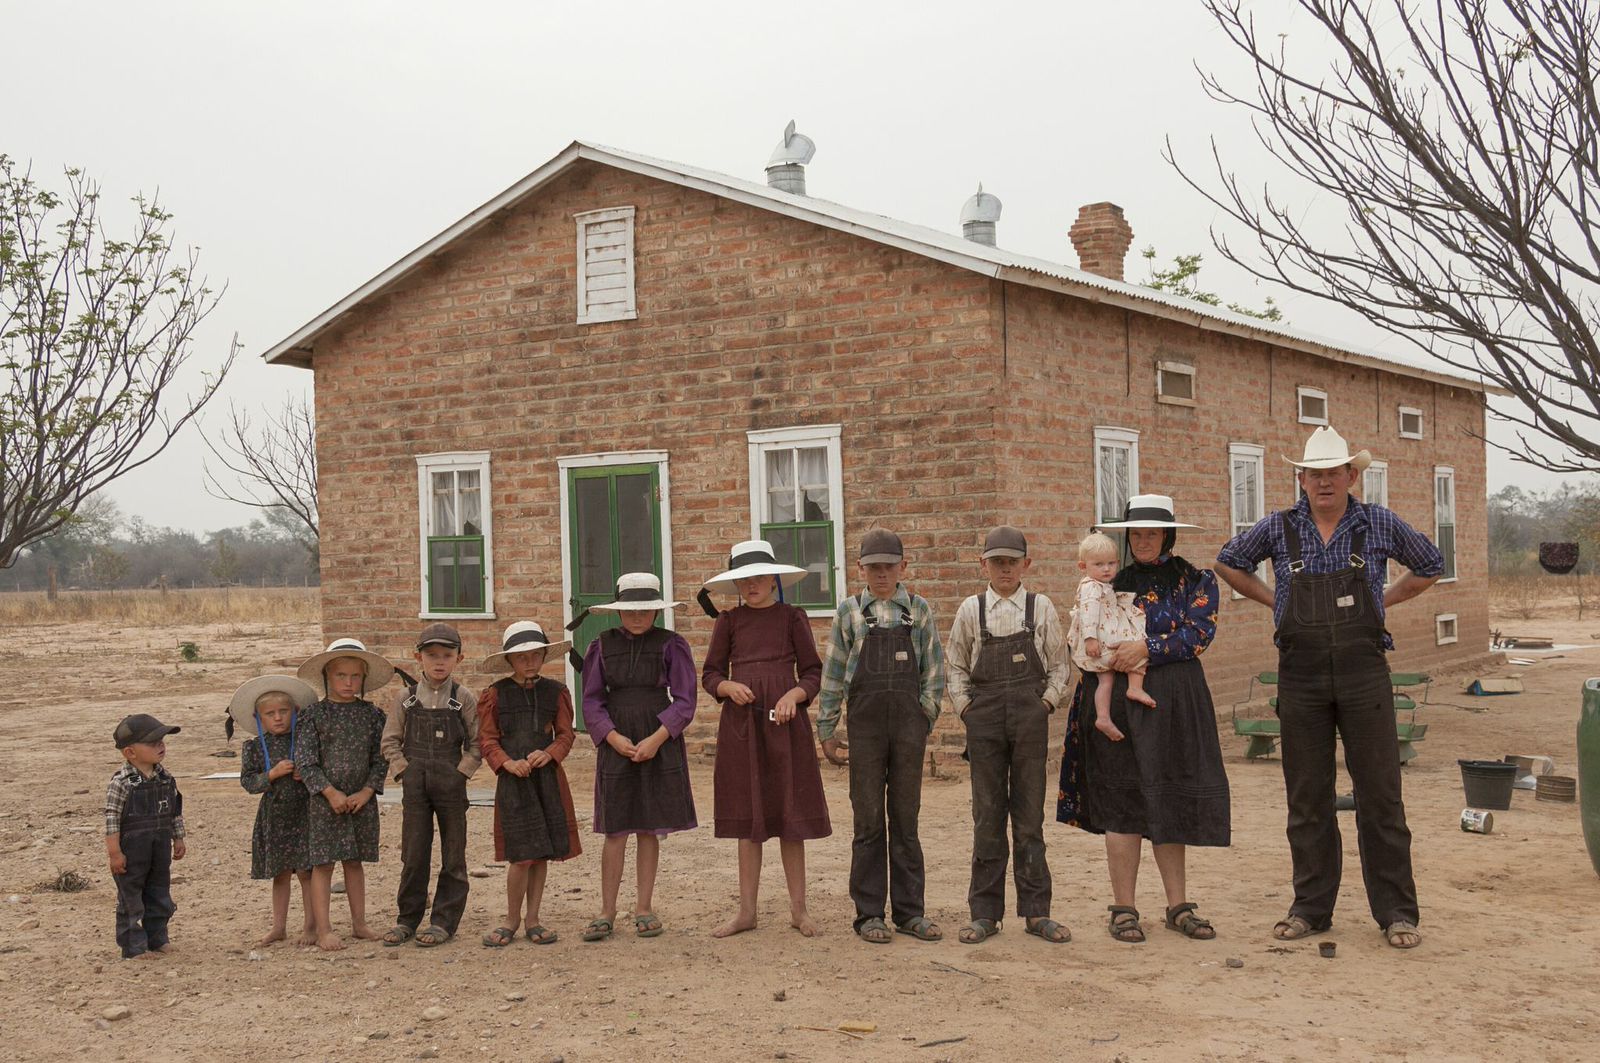 A Mennonite family are seen front of their house, Durango colony, Bolivia.